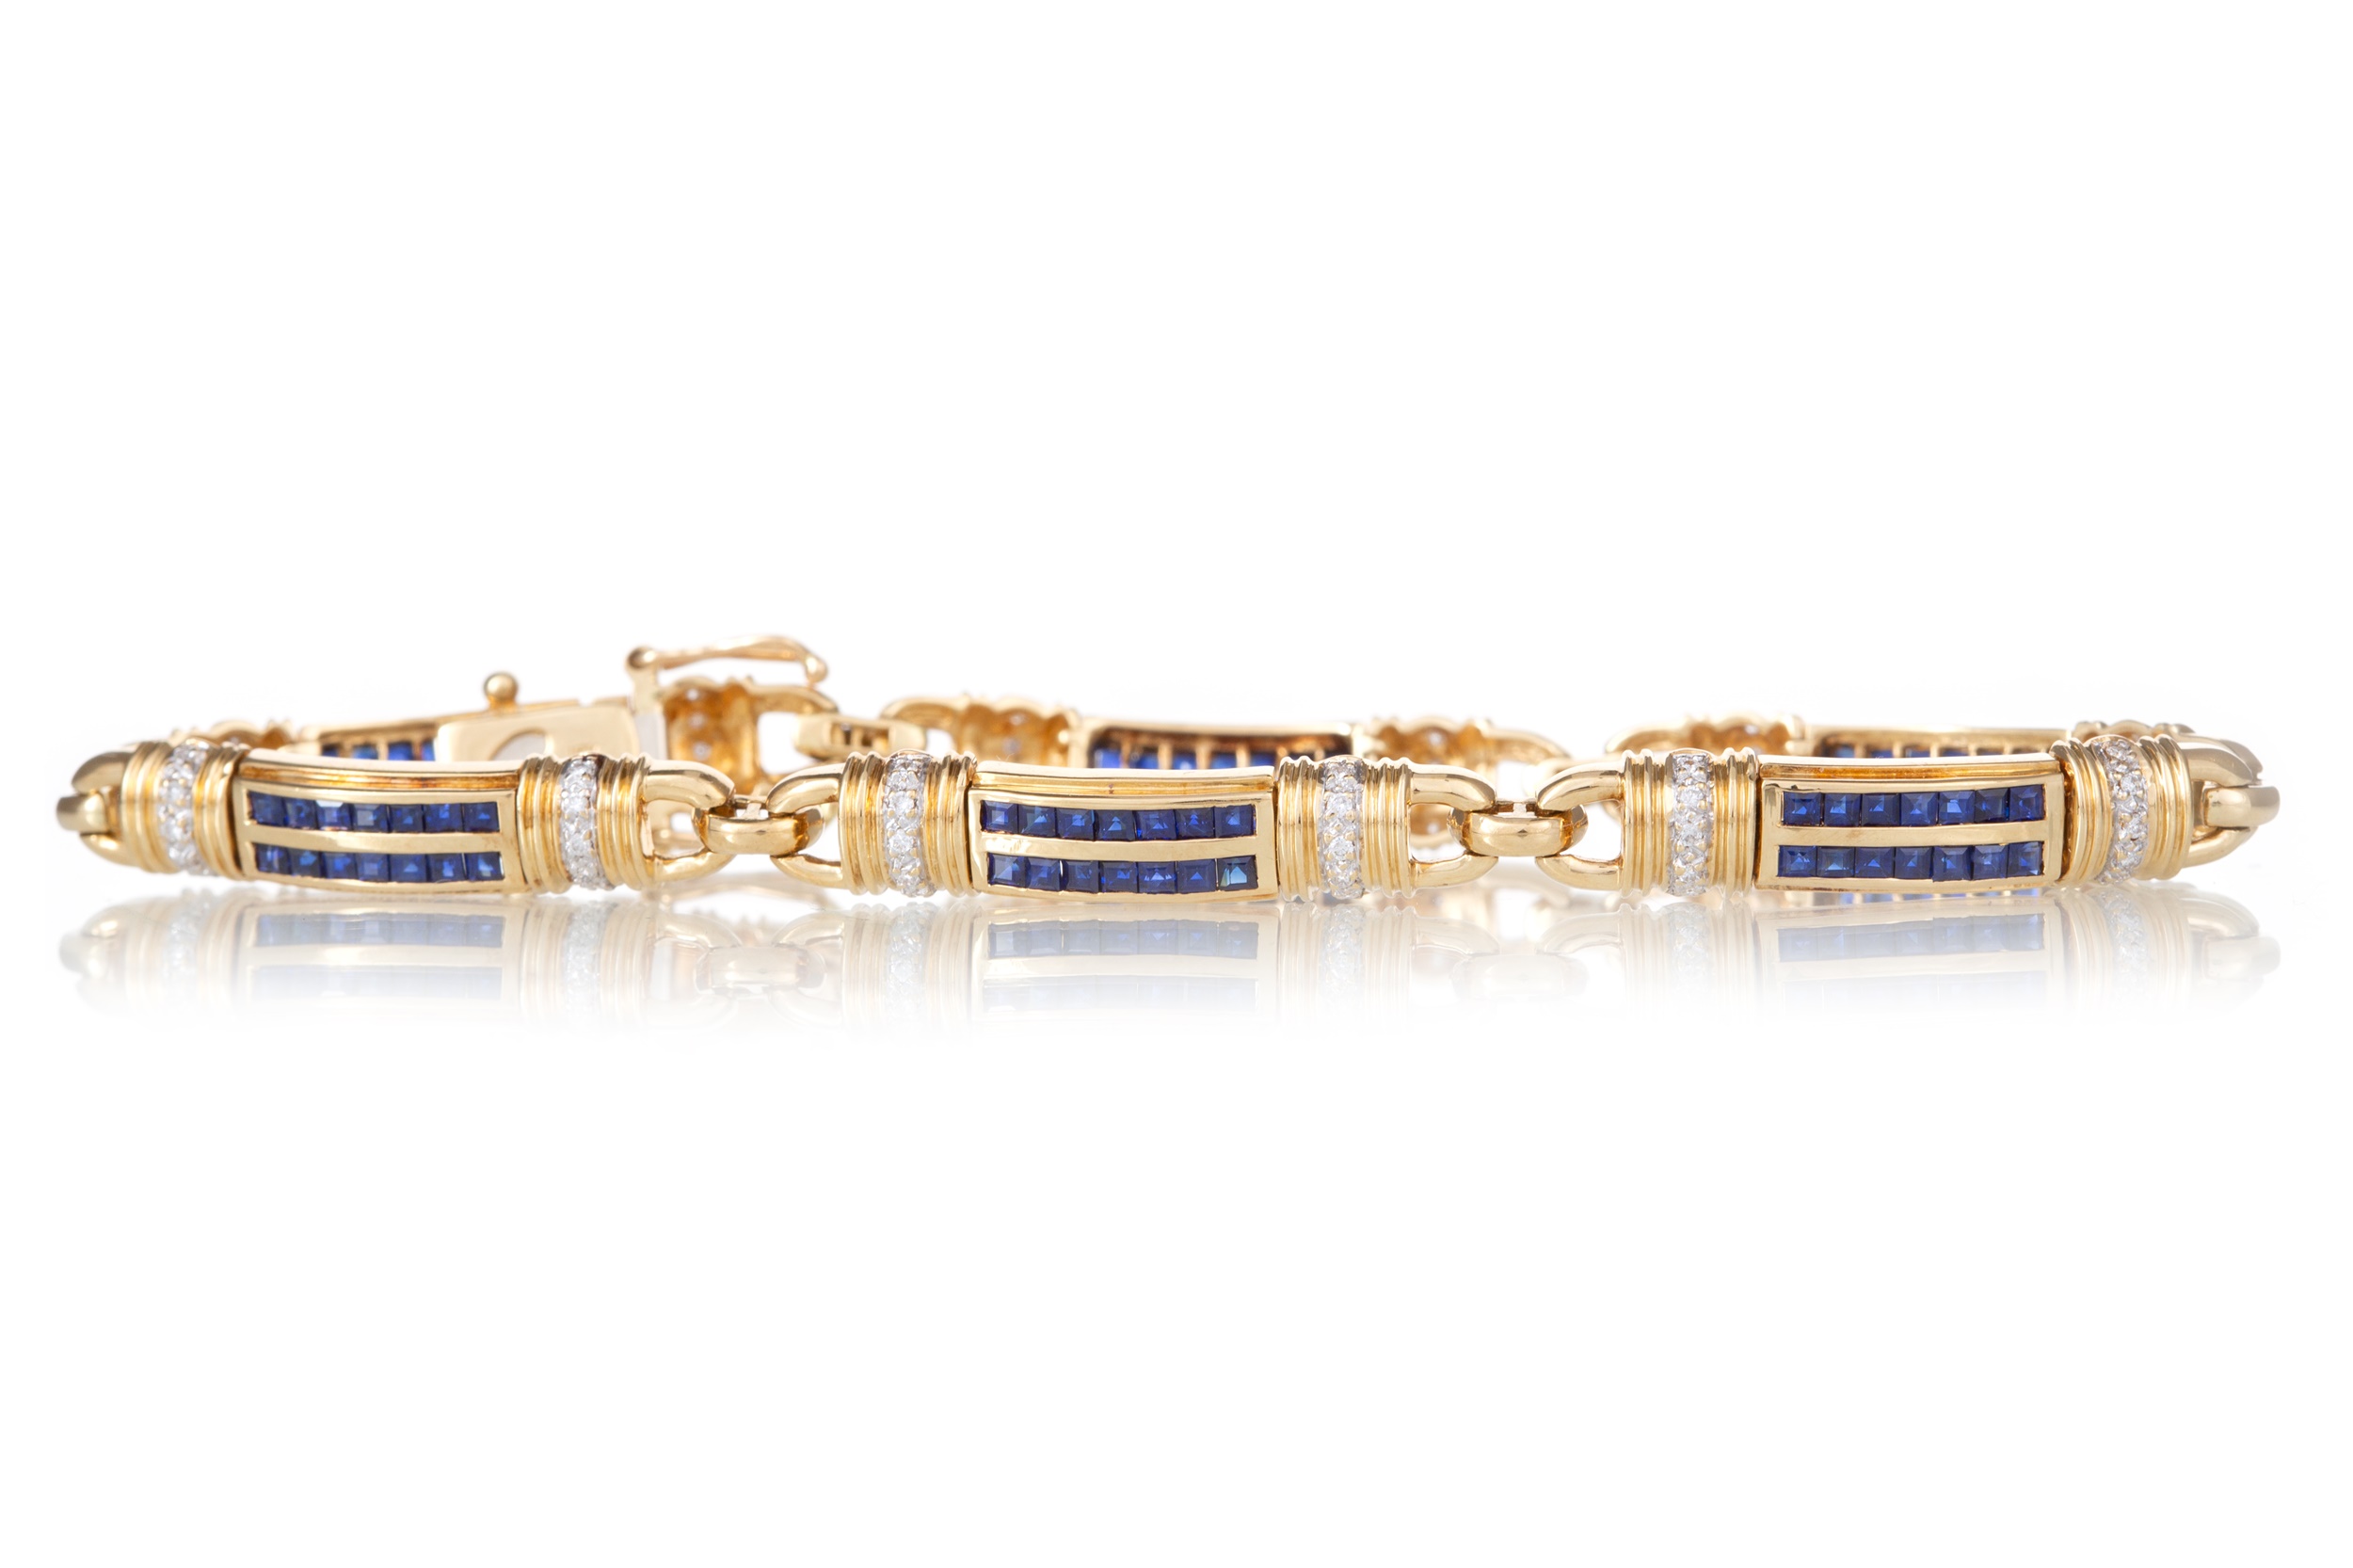 SAPPHIRE AND DIAMOND BRACELET CERTIFICATED - Image 2 of 2